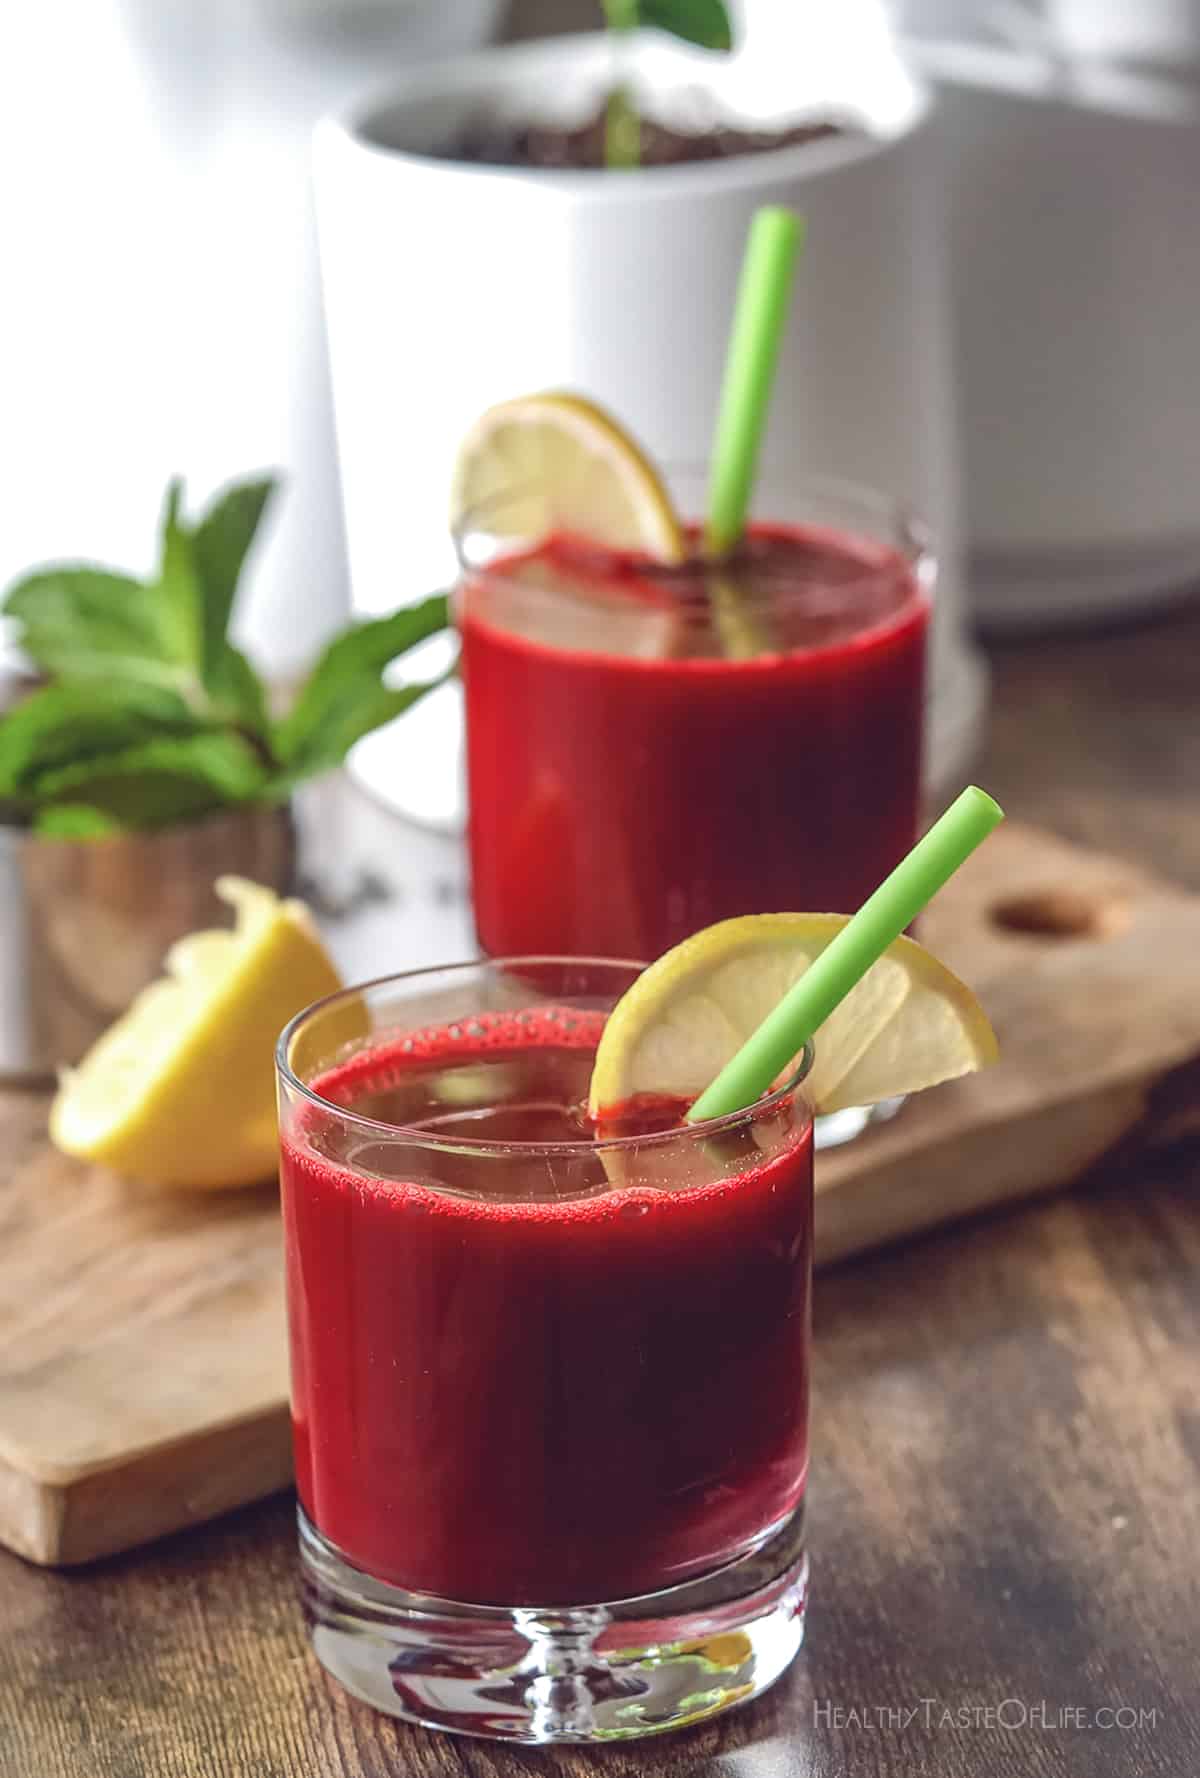 Freshly juiced beetroot juice served in a glass with a lemon wedge and a straw.